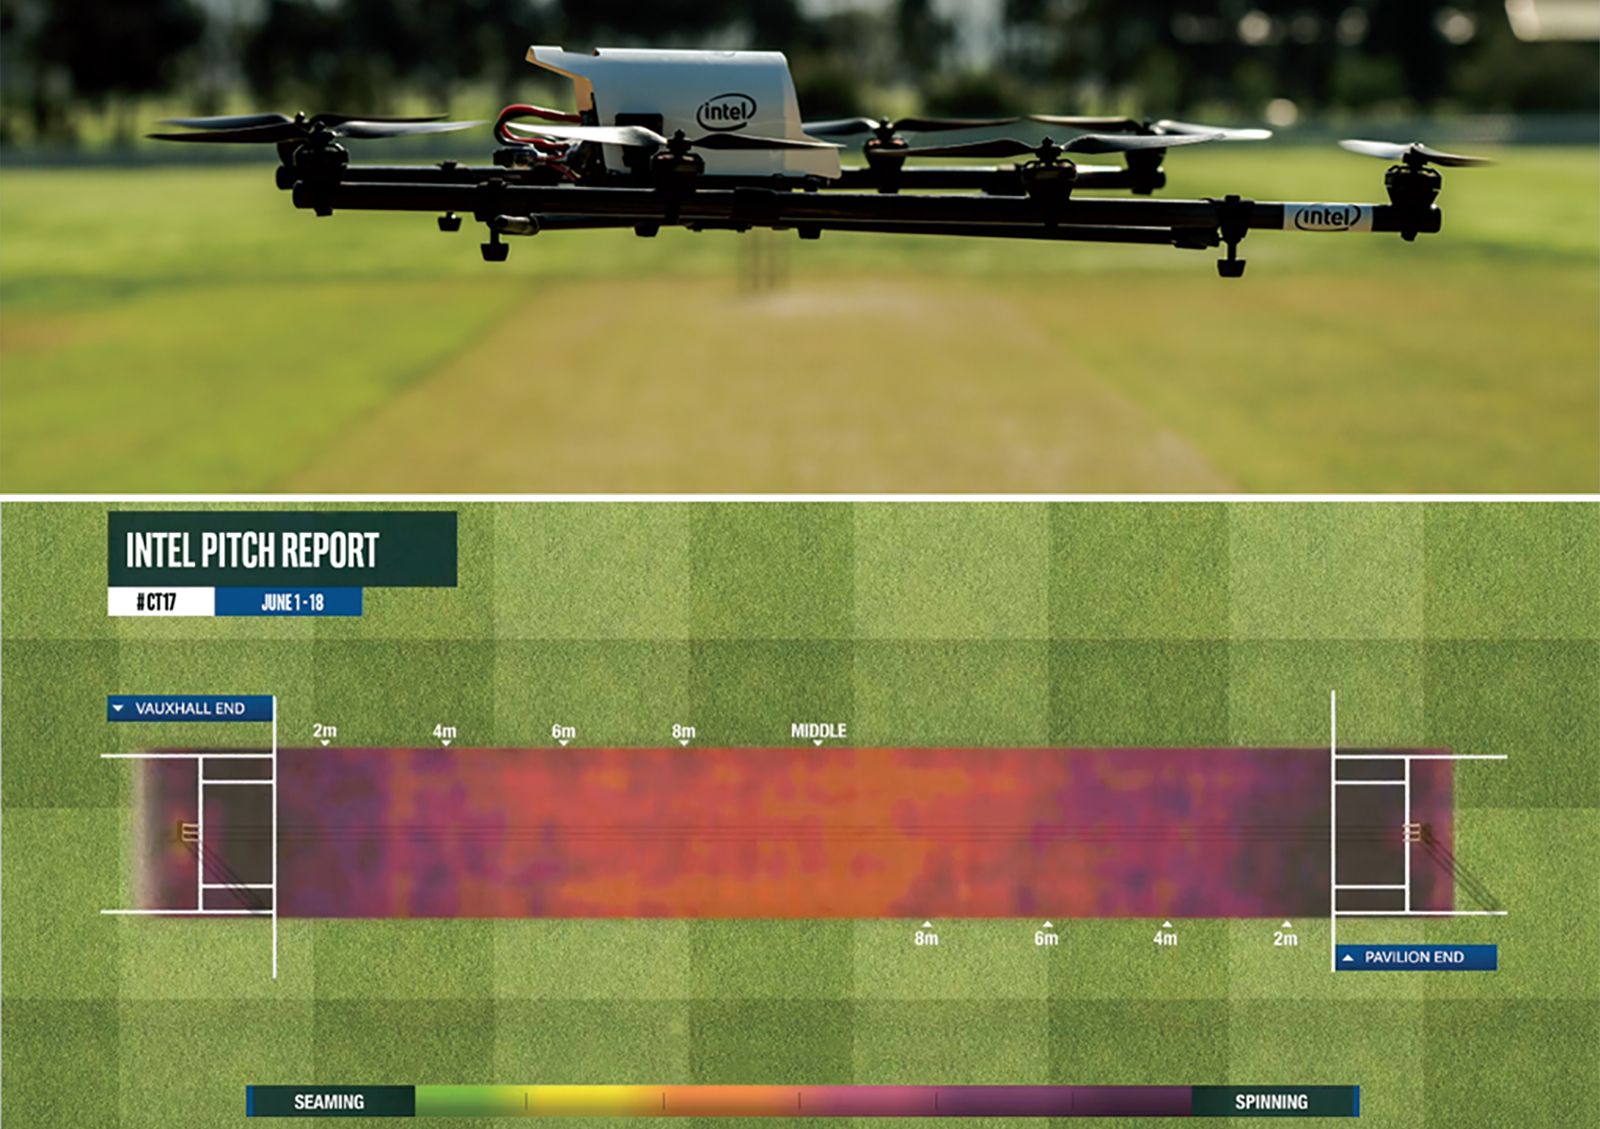 intel will present the future of cricket at the icc trophy drones bat sensors vr and more image 1